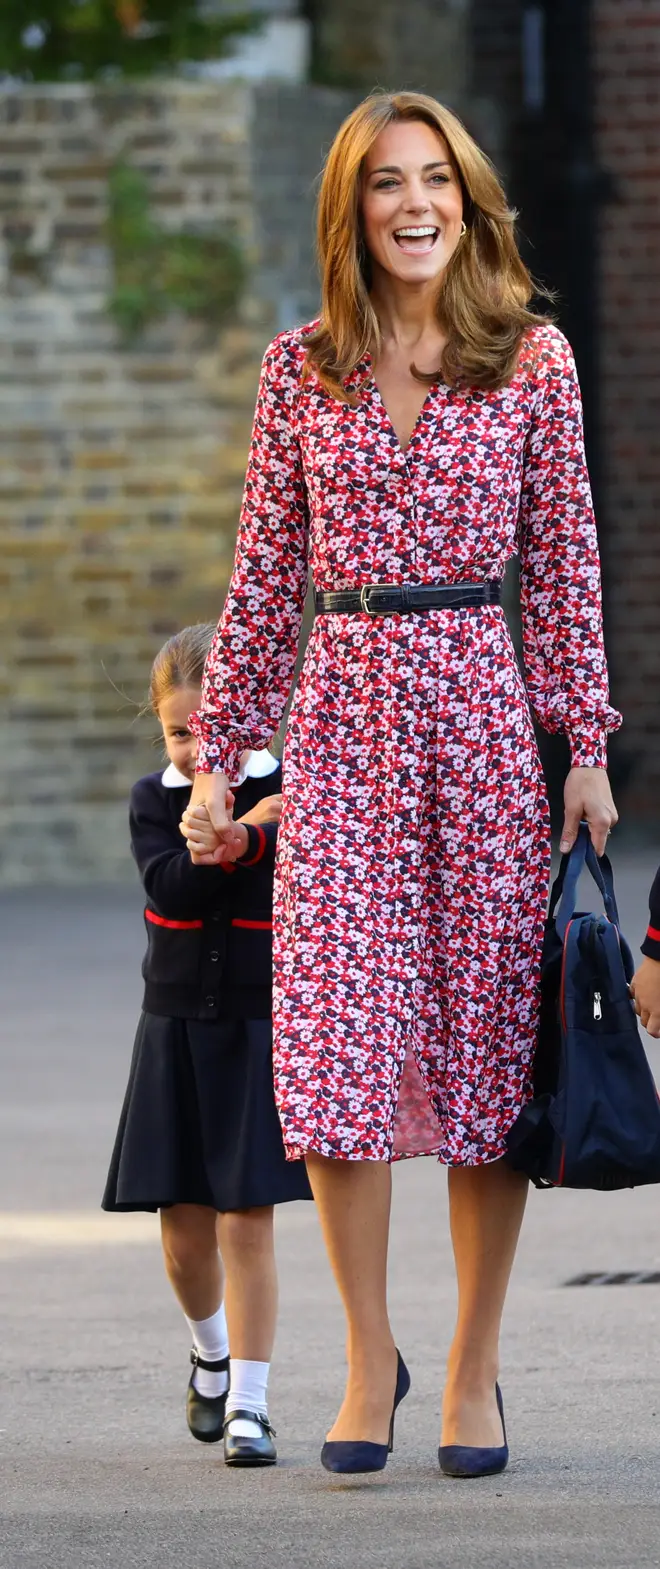 The Duchess of Cambridge missed George's first day of school after suffering from morning sickness with Prince Louis